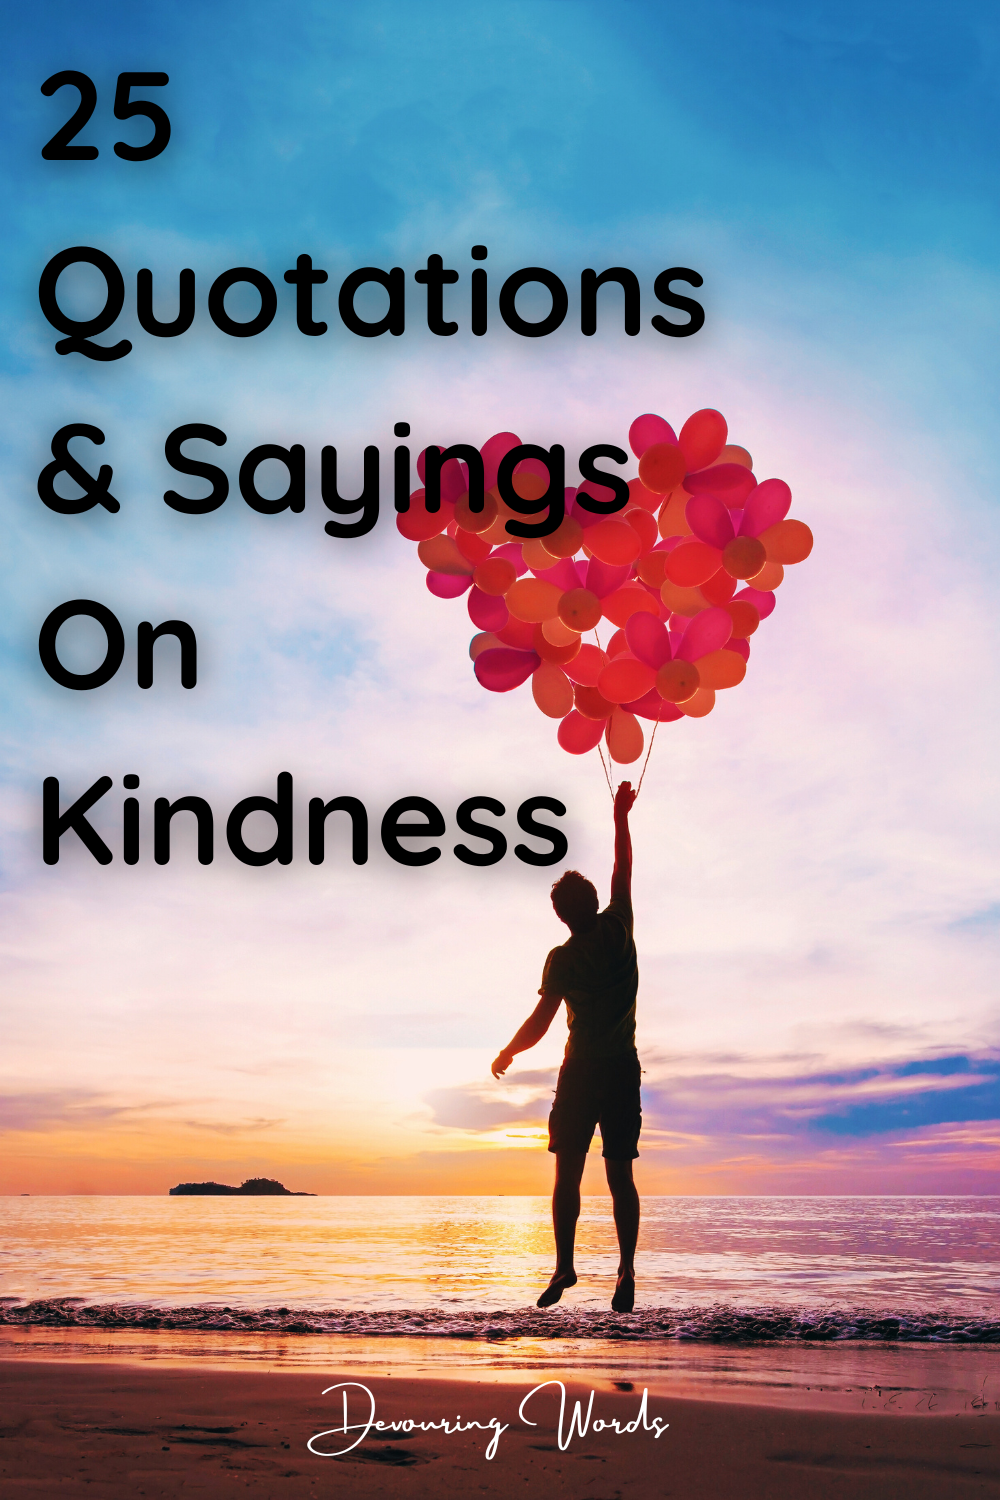 quotations on kindness
